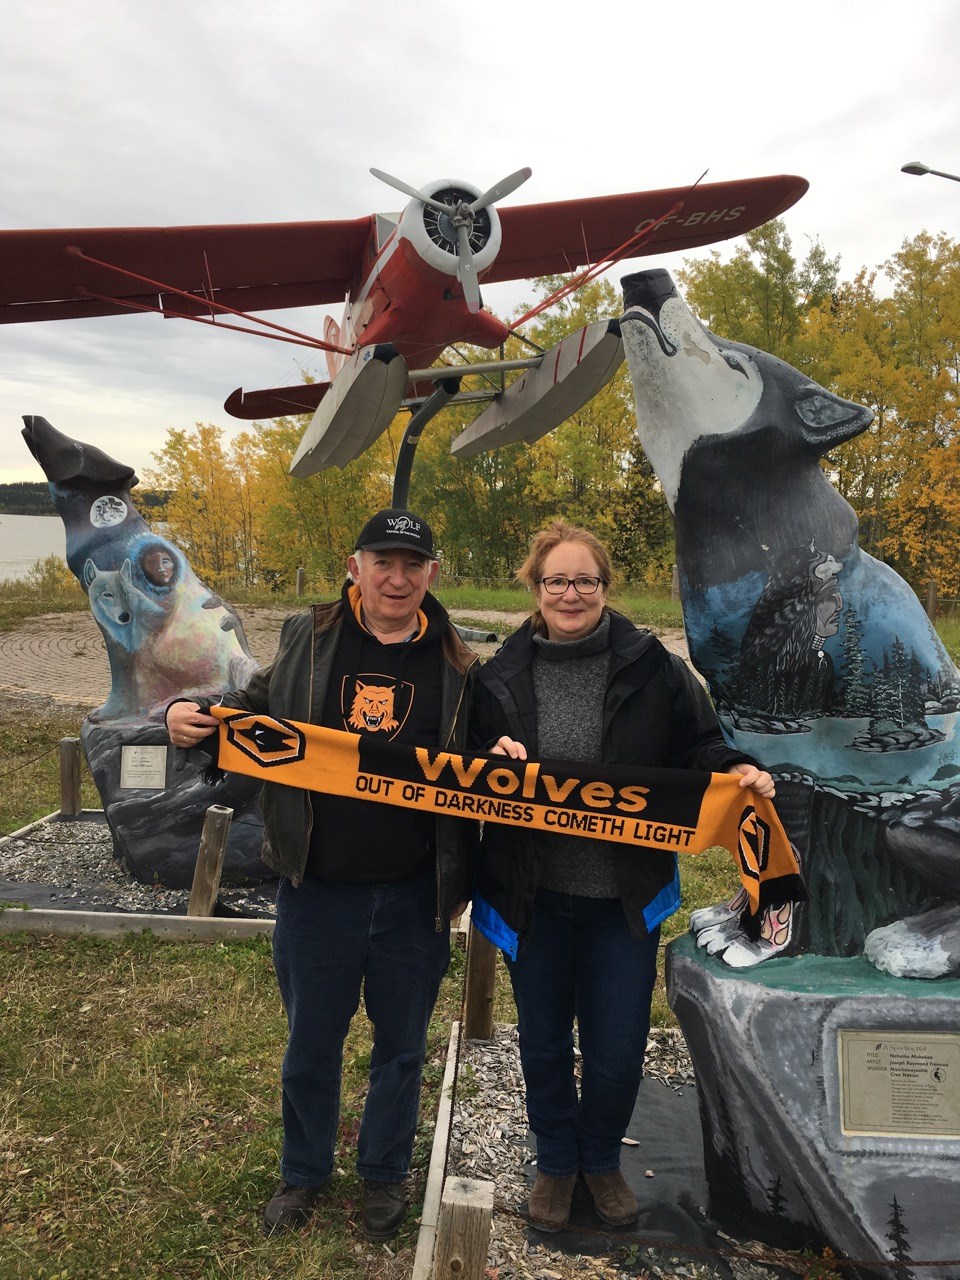 Natasha George and Fred Richings from Wolverhampton, England won a 12-day trip to Manitoba. They sho